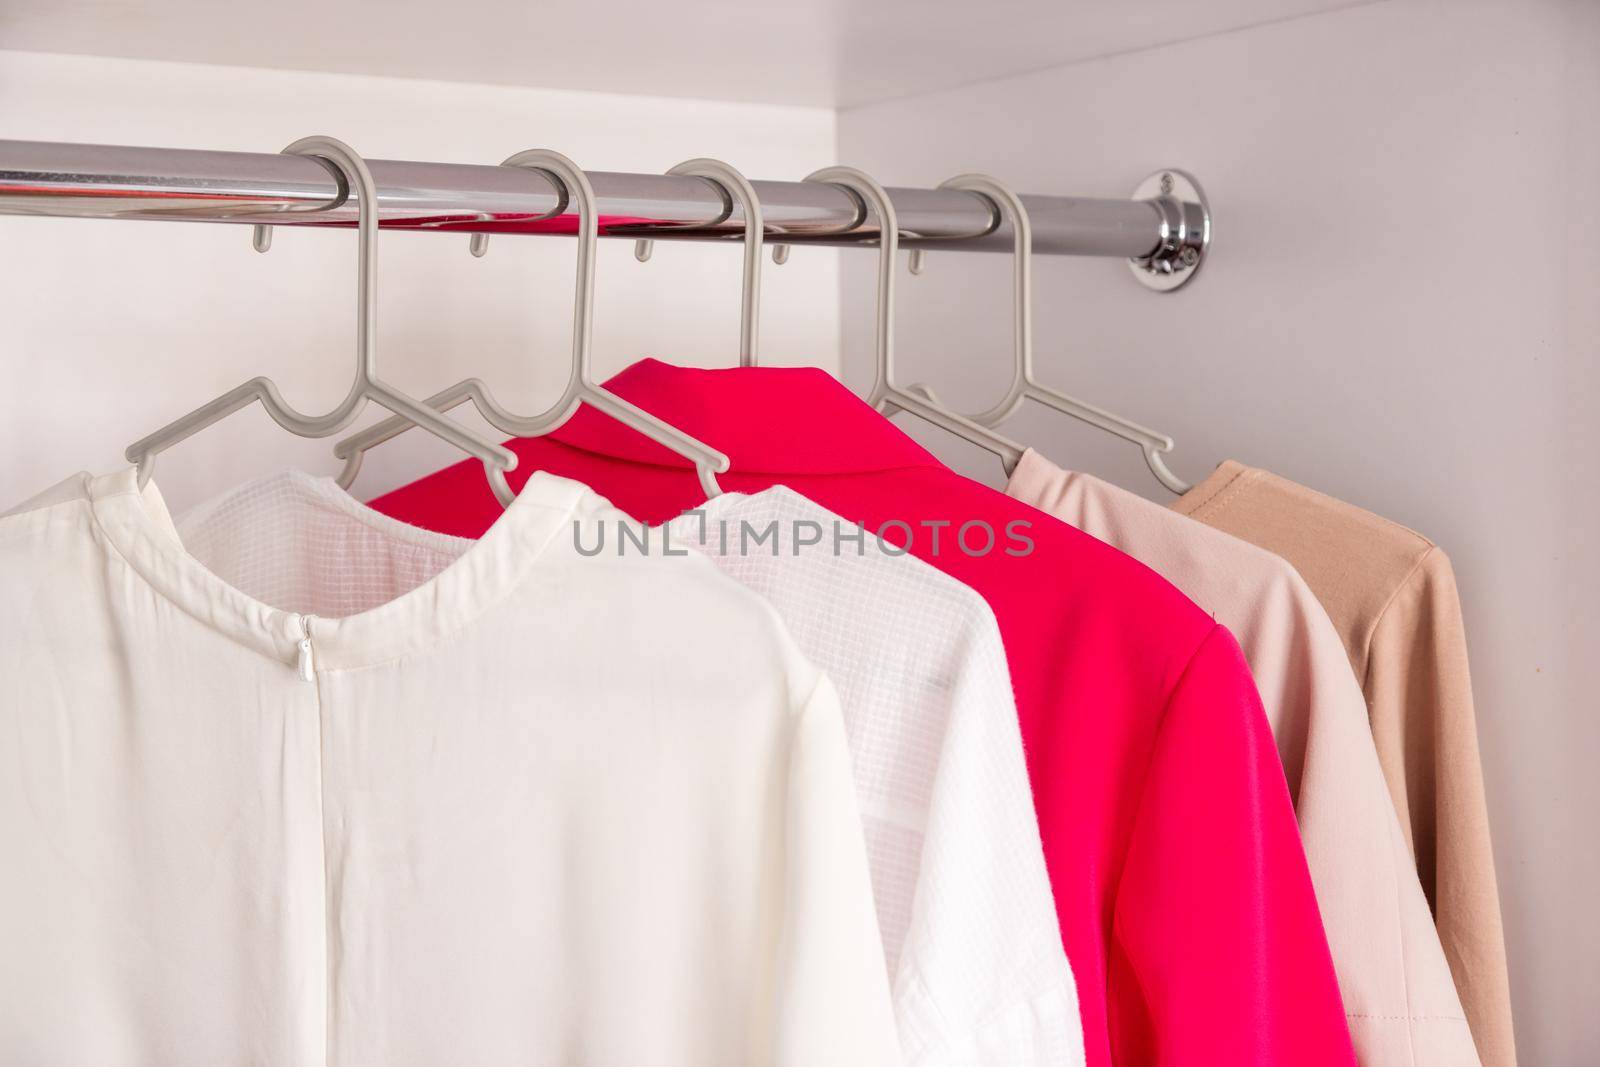 The basic wardrobe of a fashion stylist. Neutral colors: white, black, beige and accent French red. White wardrobe, gray hangers. Minimalism style